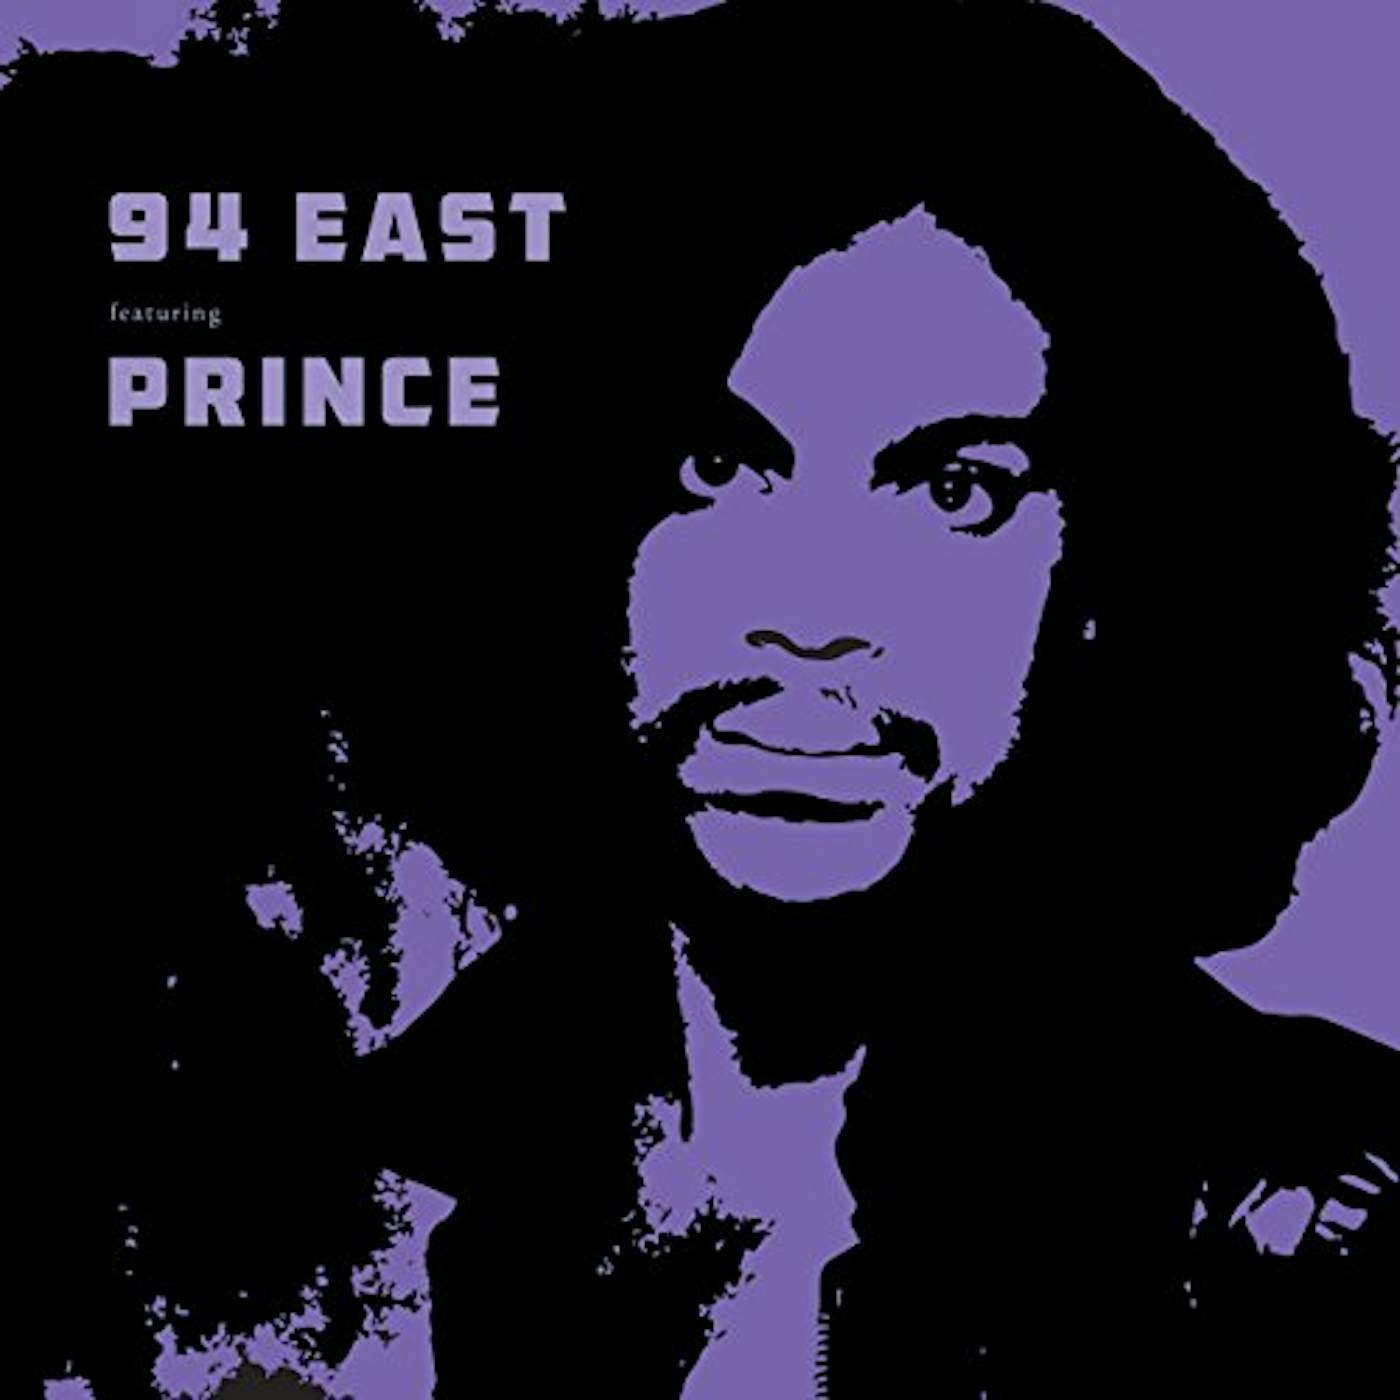 94 EAST FEATURING PRINCE Vinyl Record